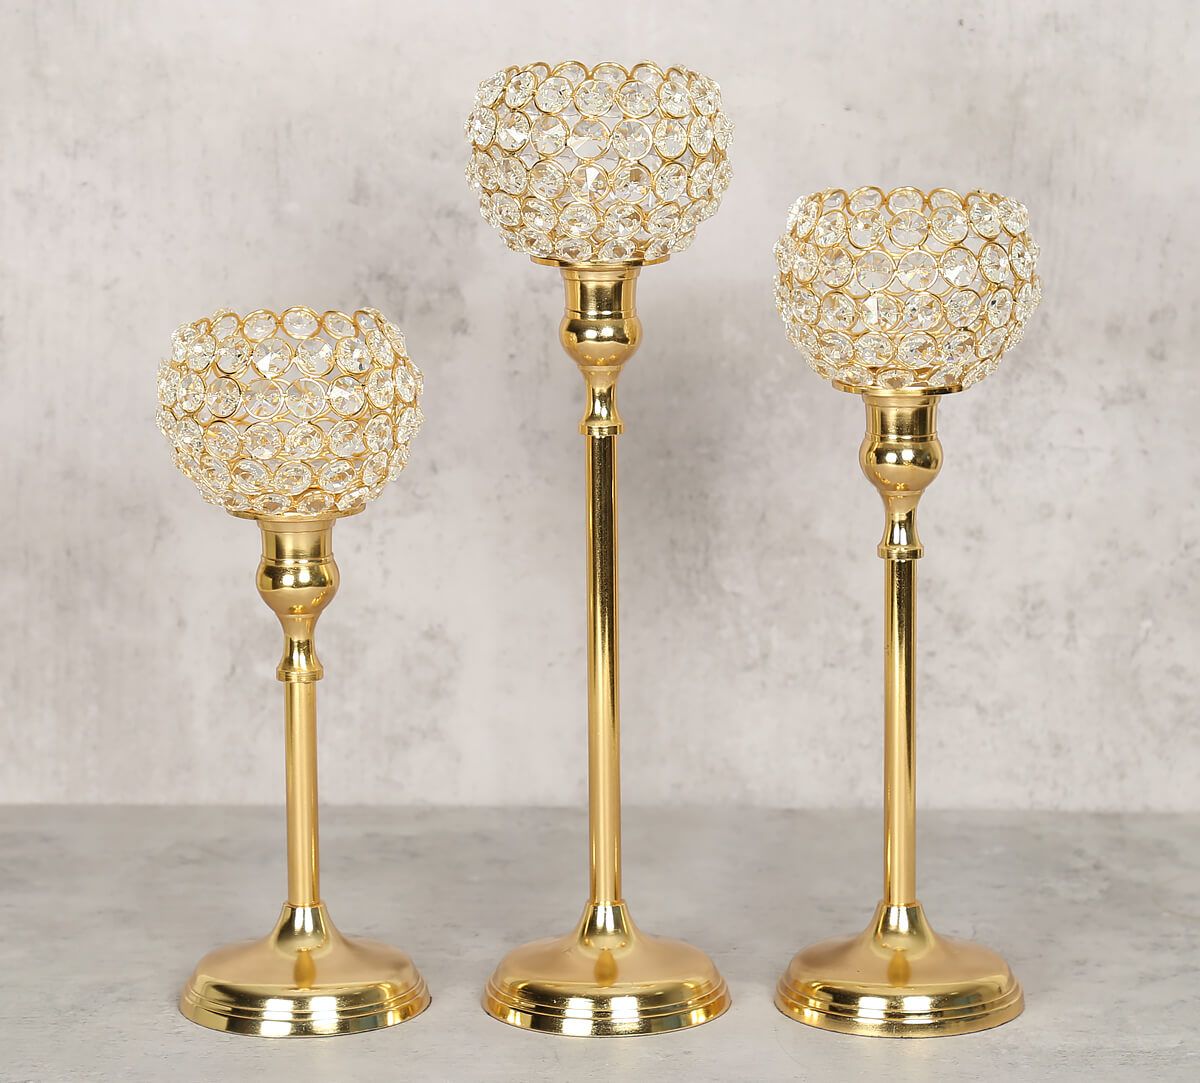 Buy Crystal Candles & Candle Holders Online